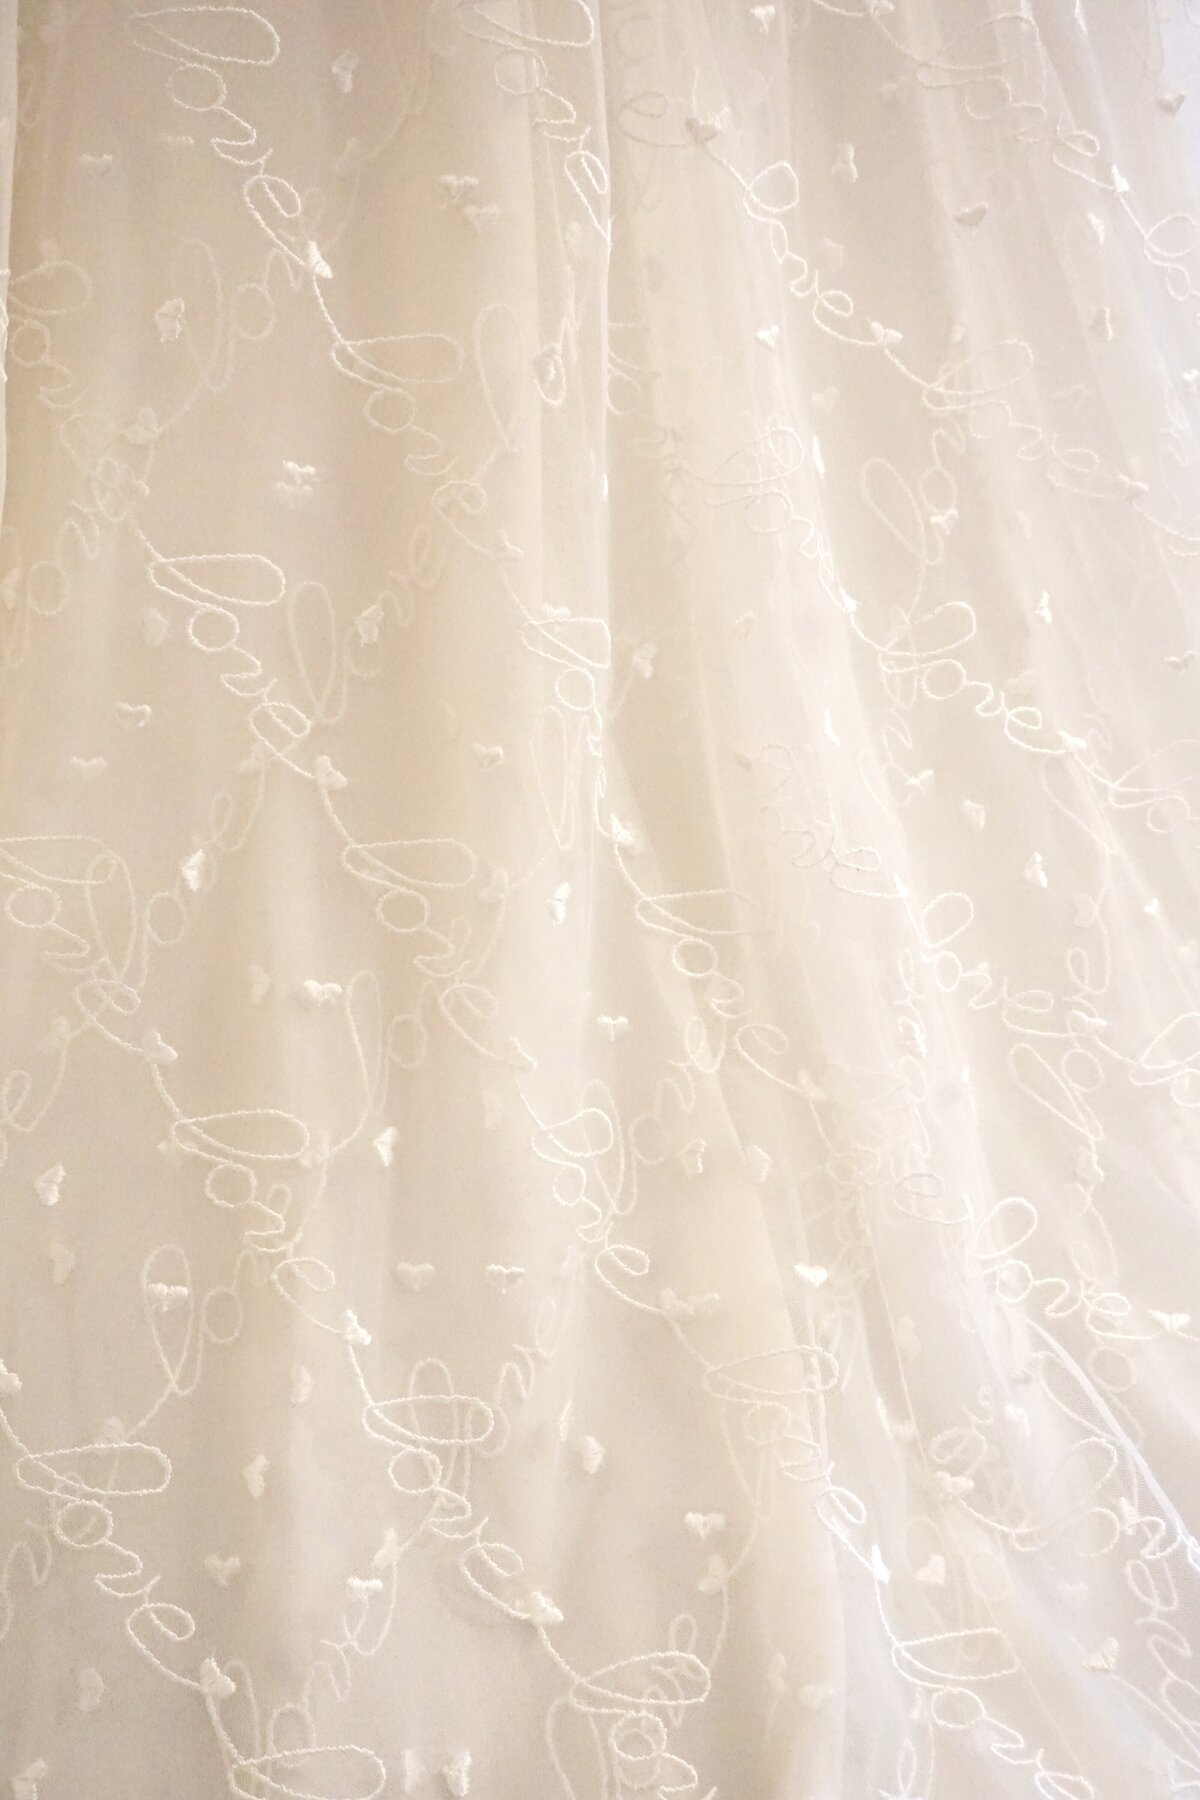 The criss-crossing layers of tulle on the Norma Jean wedding dress style are embroidered with lines of hearts and the word "love."